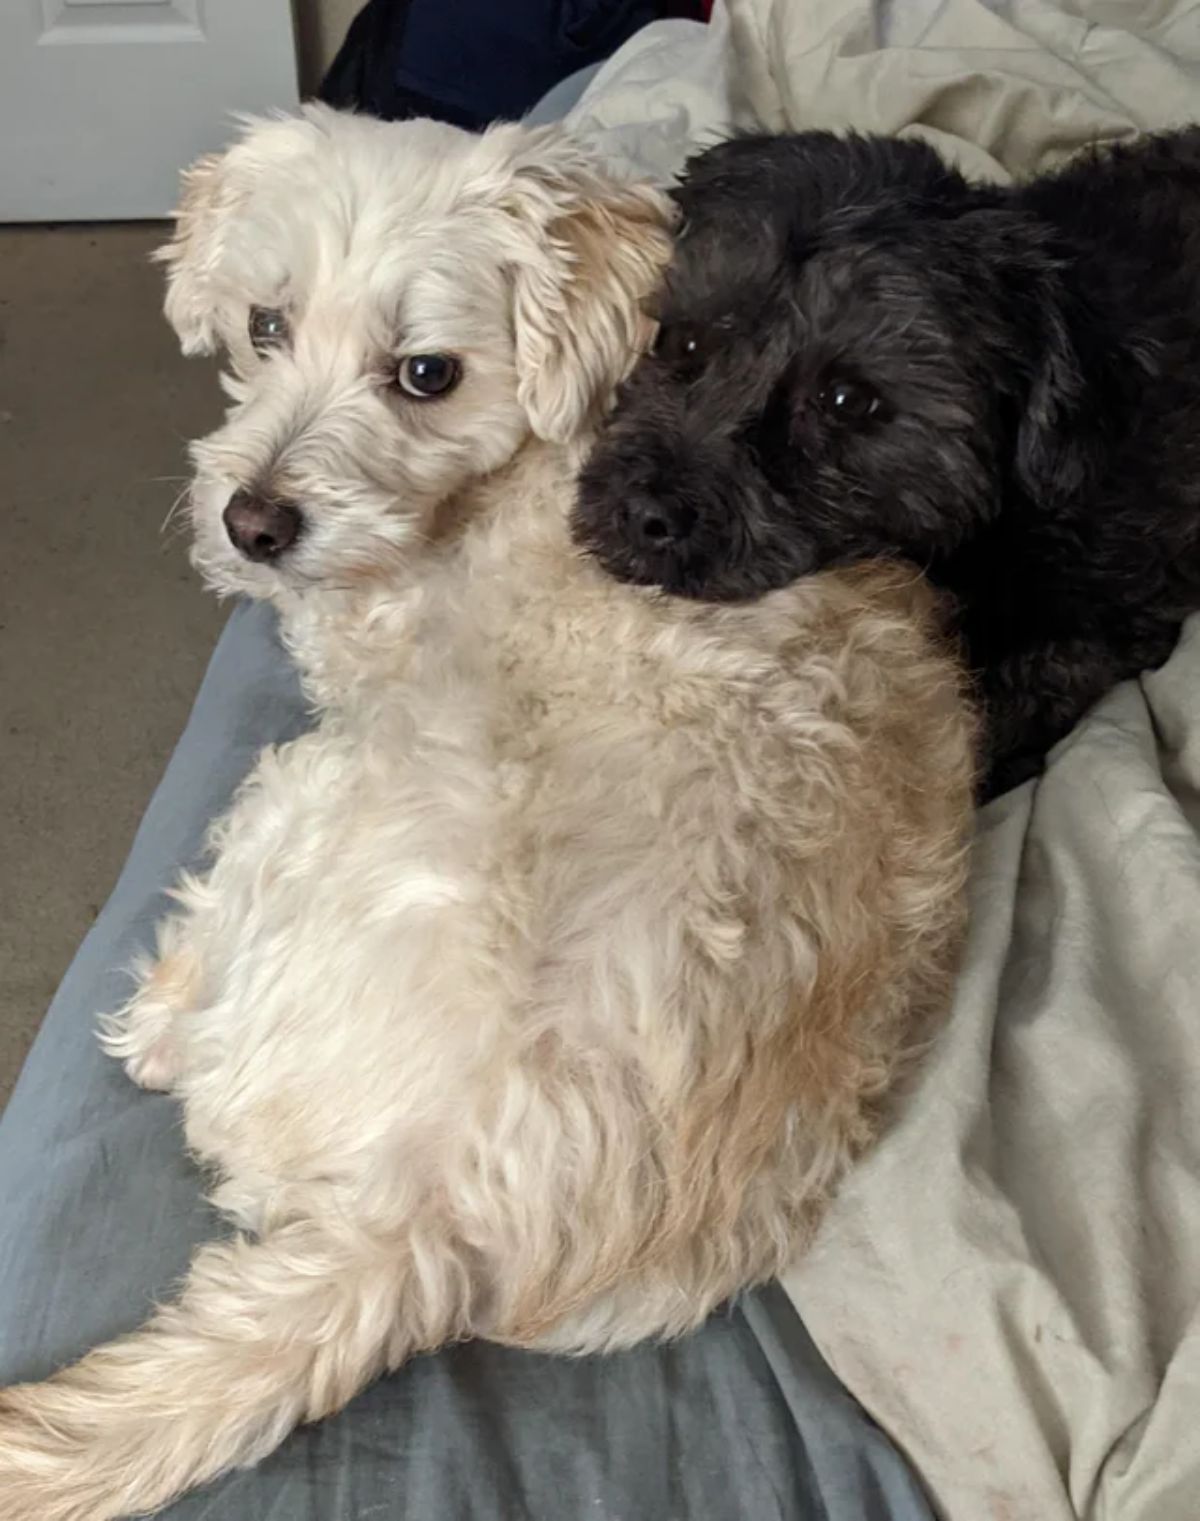 1 fluffy white dog and 1 fluffy black dog laying together